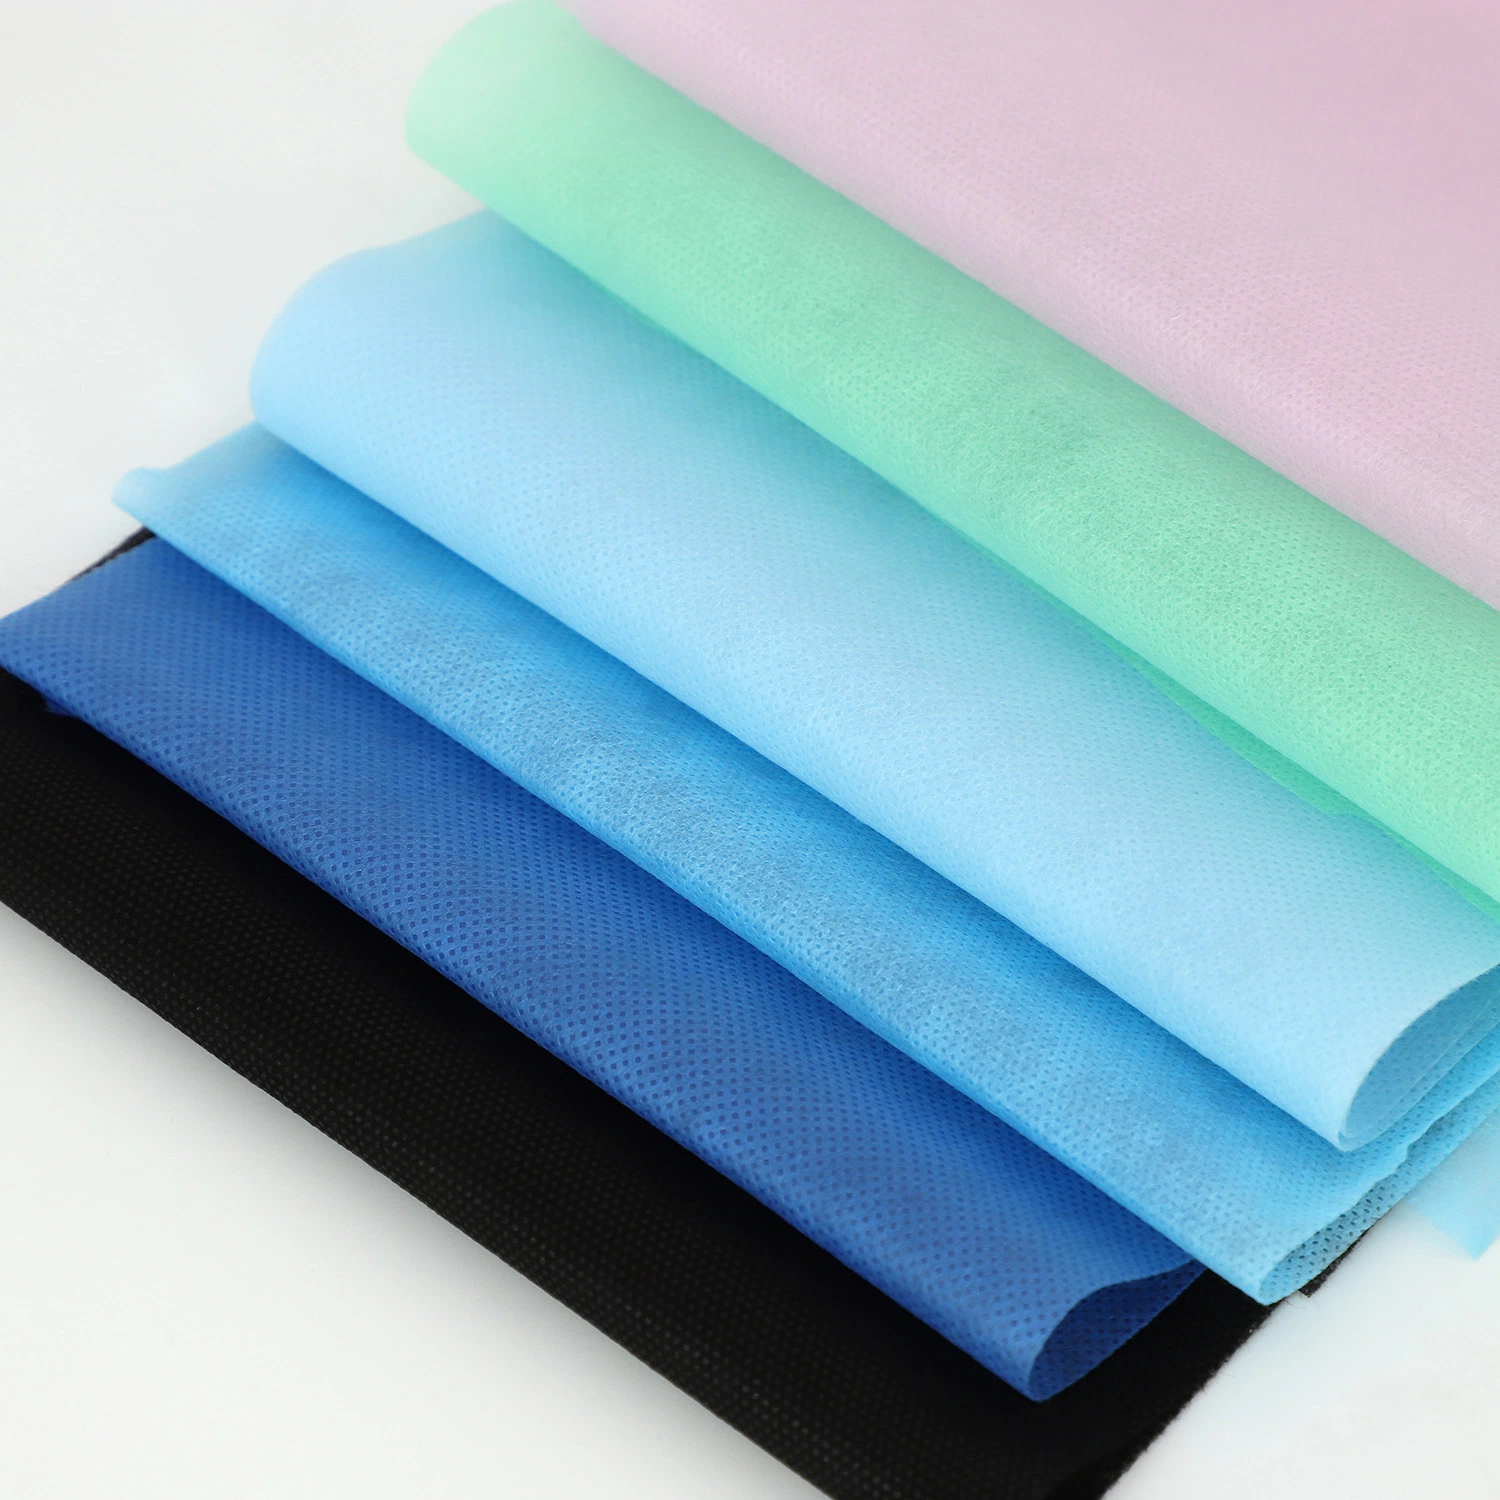 PP Polypropylene Spunbond Nonwoven Fabric TNT for Packaging Medical Agricultural Industrial & Home Non Woven Fabric